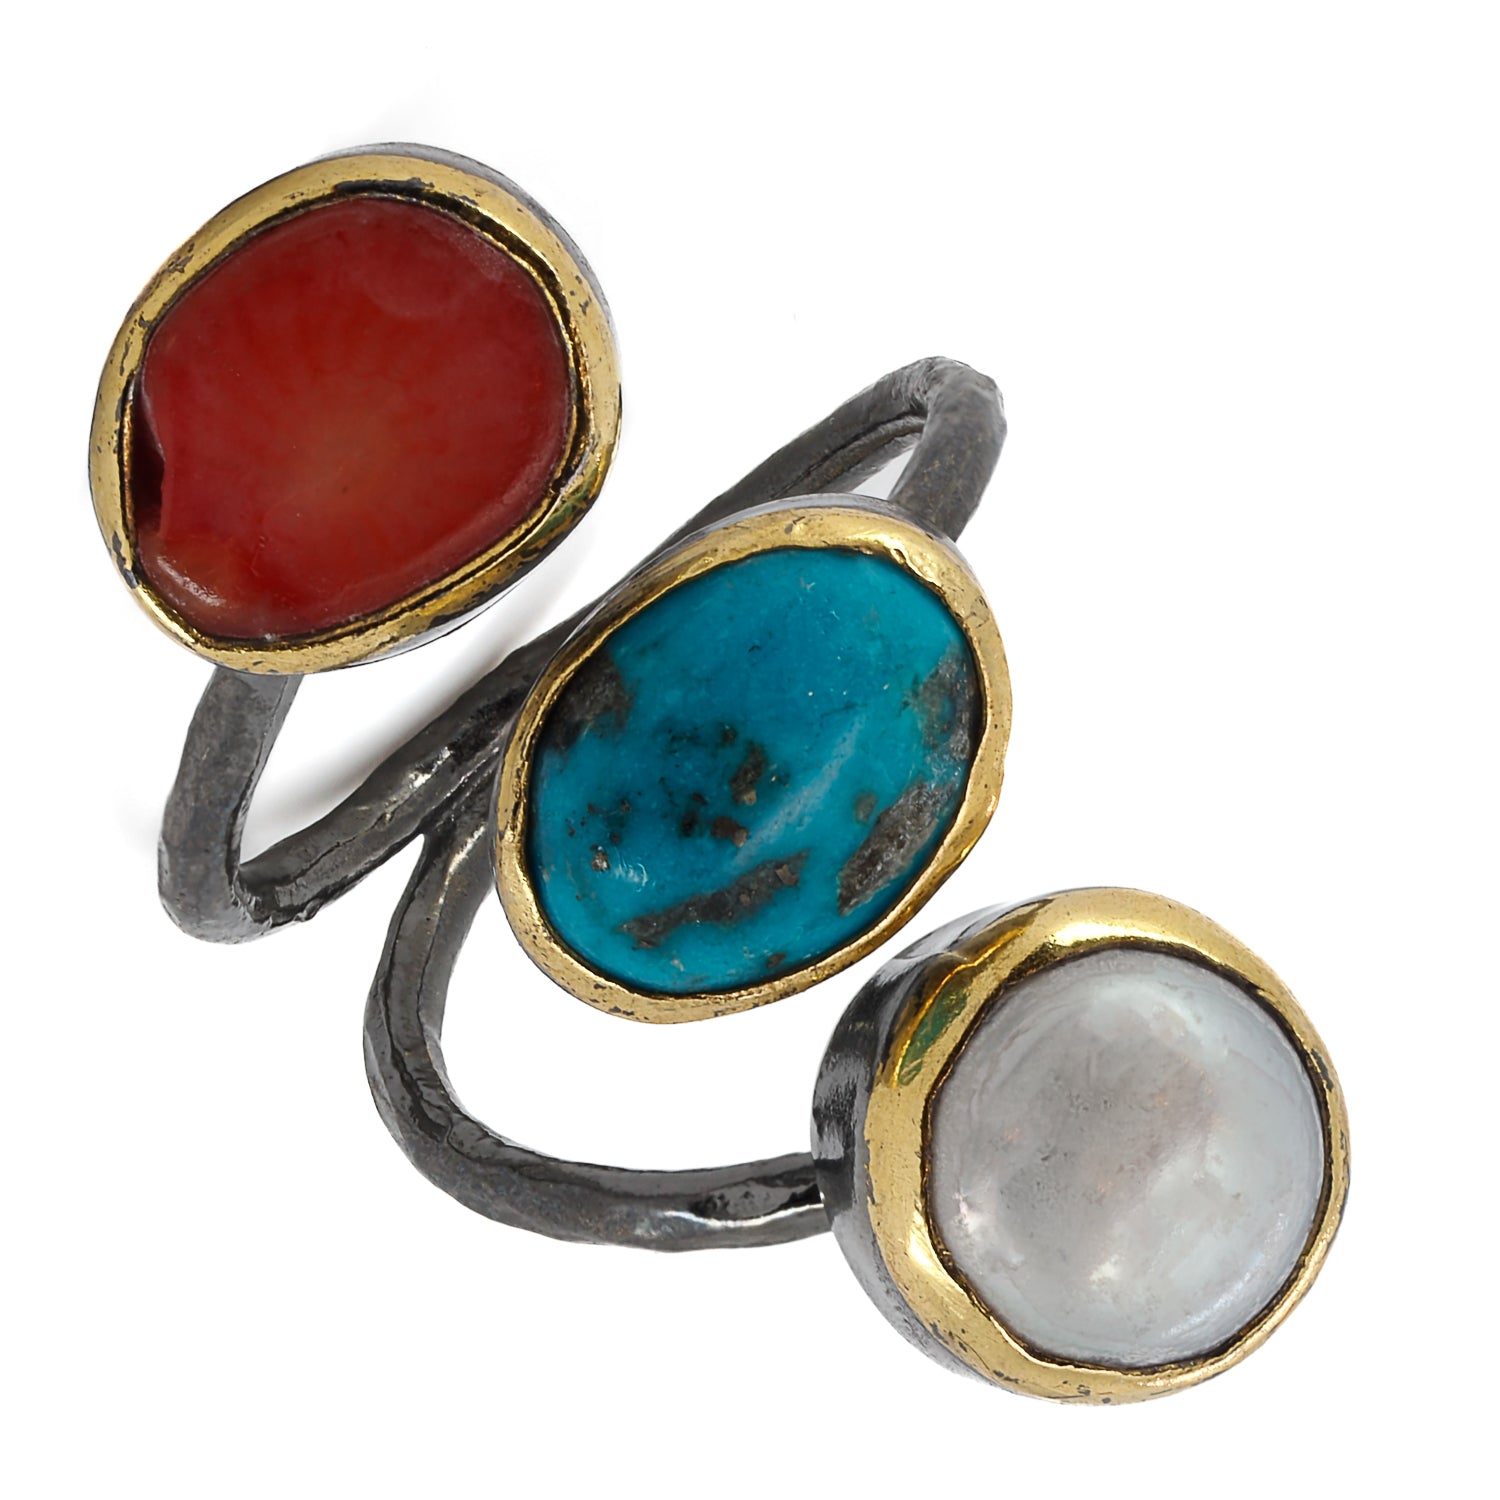 The vibrant energy of the gemstones comes to life in the Triple Gemstone Sterling Silver Ring.